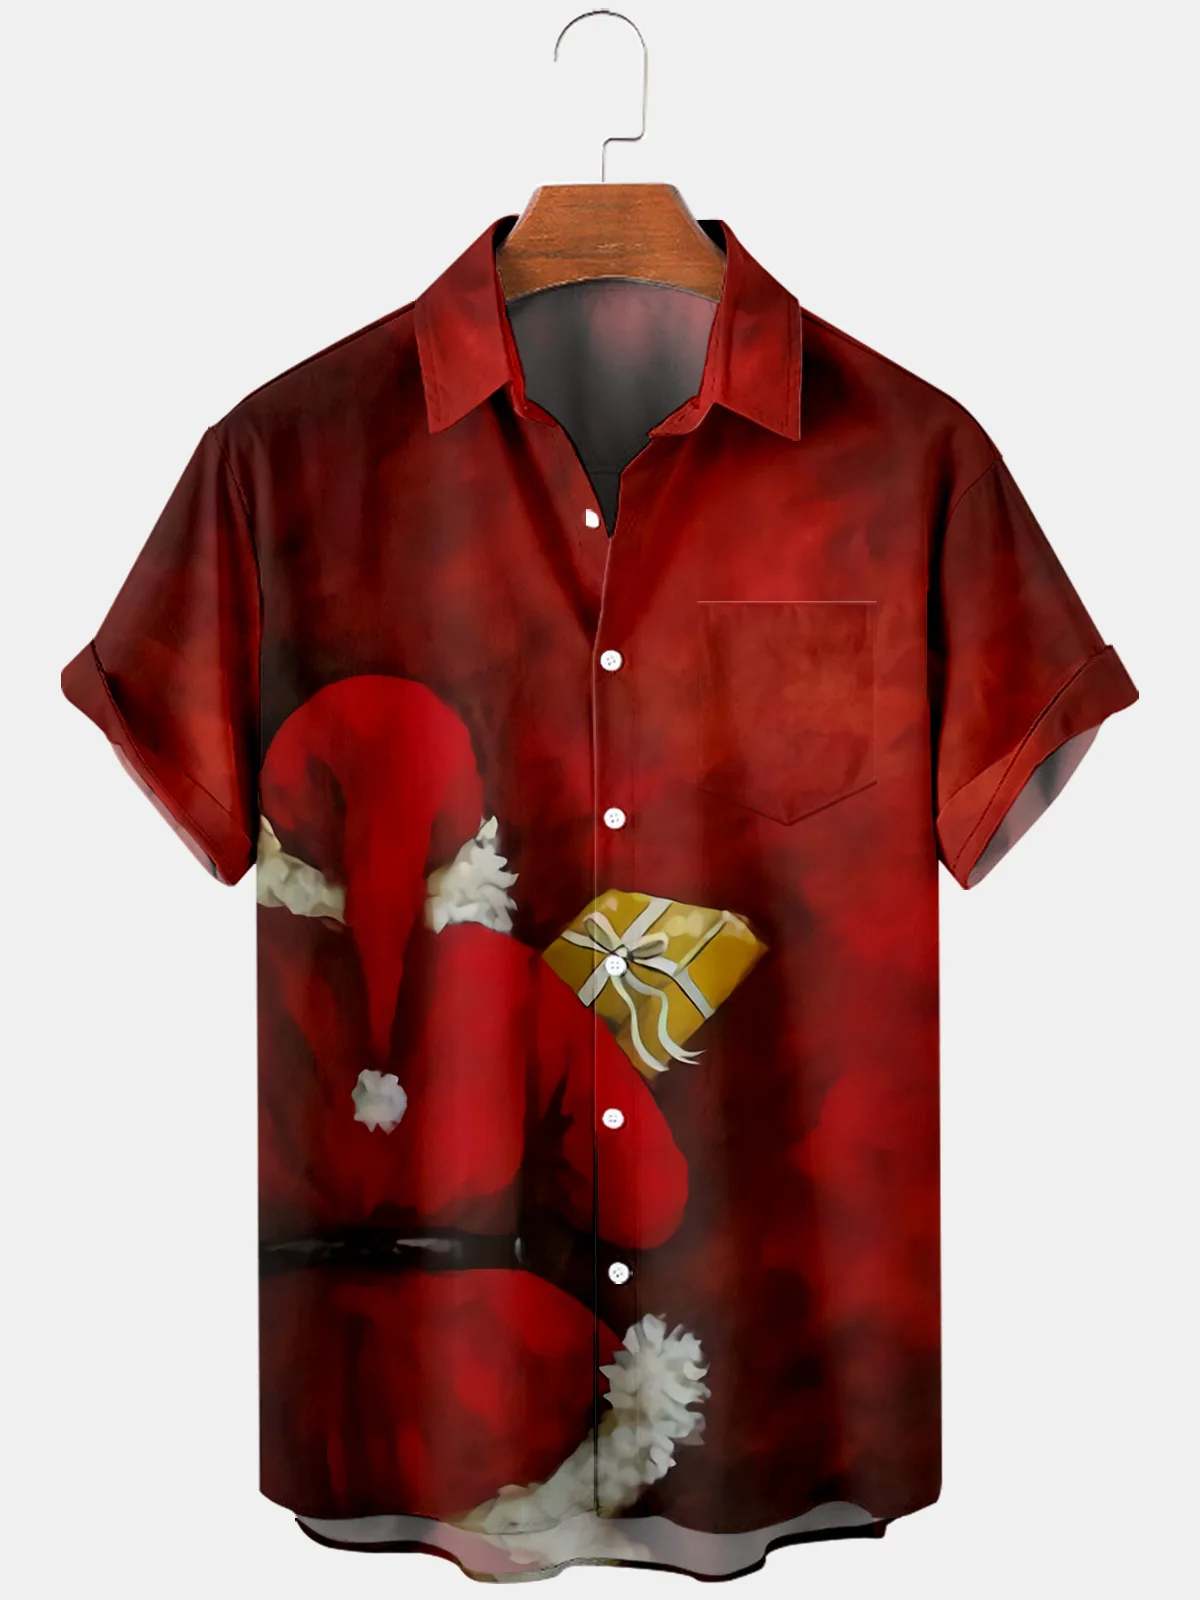 New Christmas Shirt Plus Size Santa Claus 3D Print Poacket shirts for Men Vintage Y2K Clothes Streetwear earrings christmas santa claus beading earrings in multicolor size one size